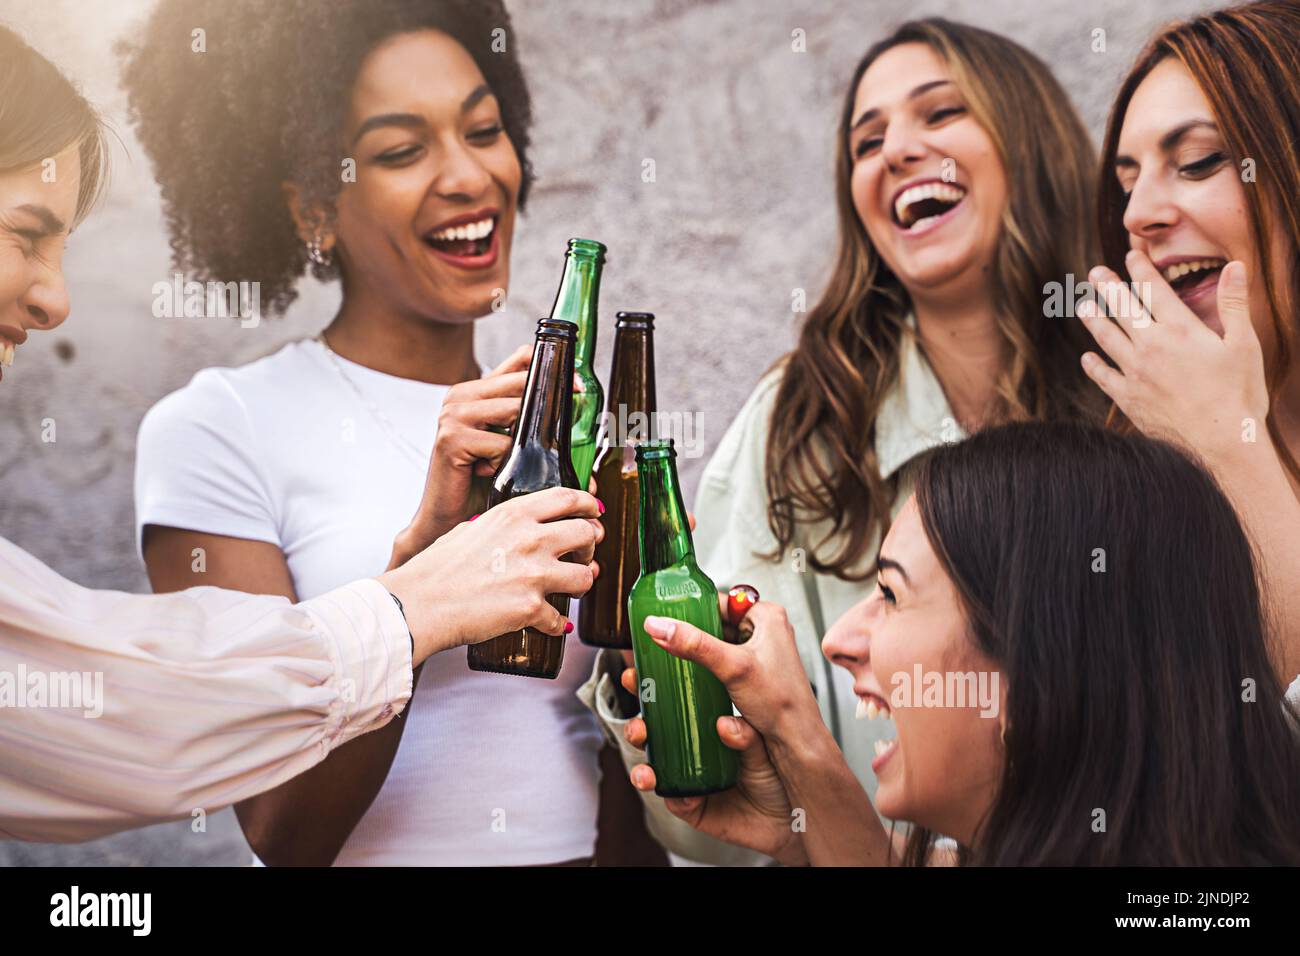 Women only beer party - multiethnic group of cheerful girlfriends having fun toasting and laughing together - focus on the bottles - neutral backgroun Stock Photo